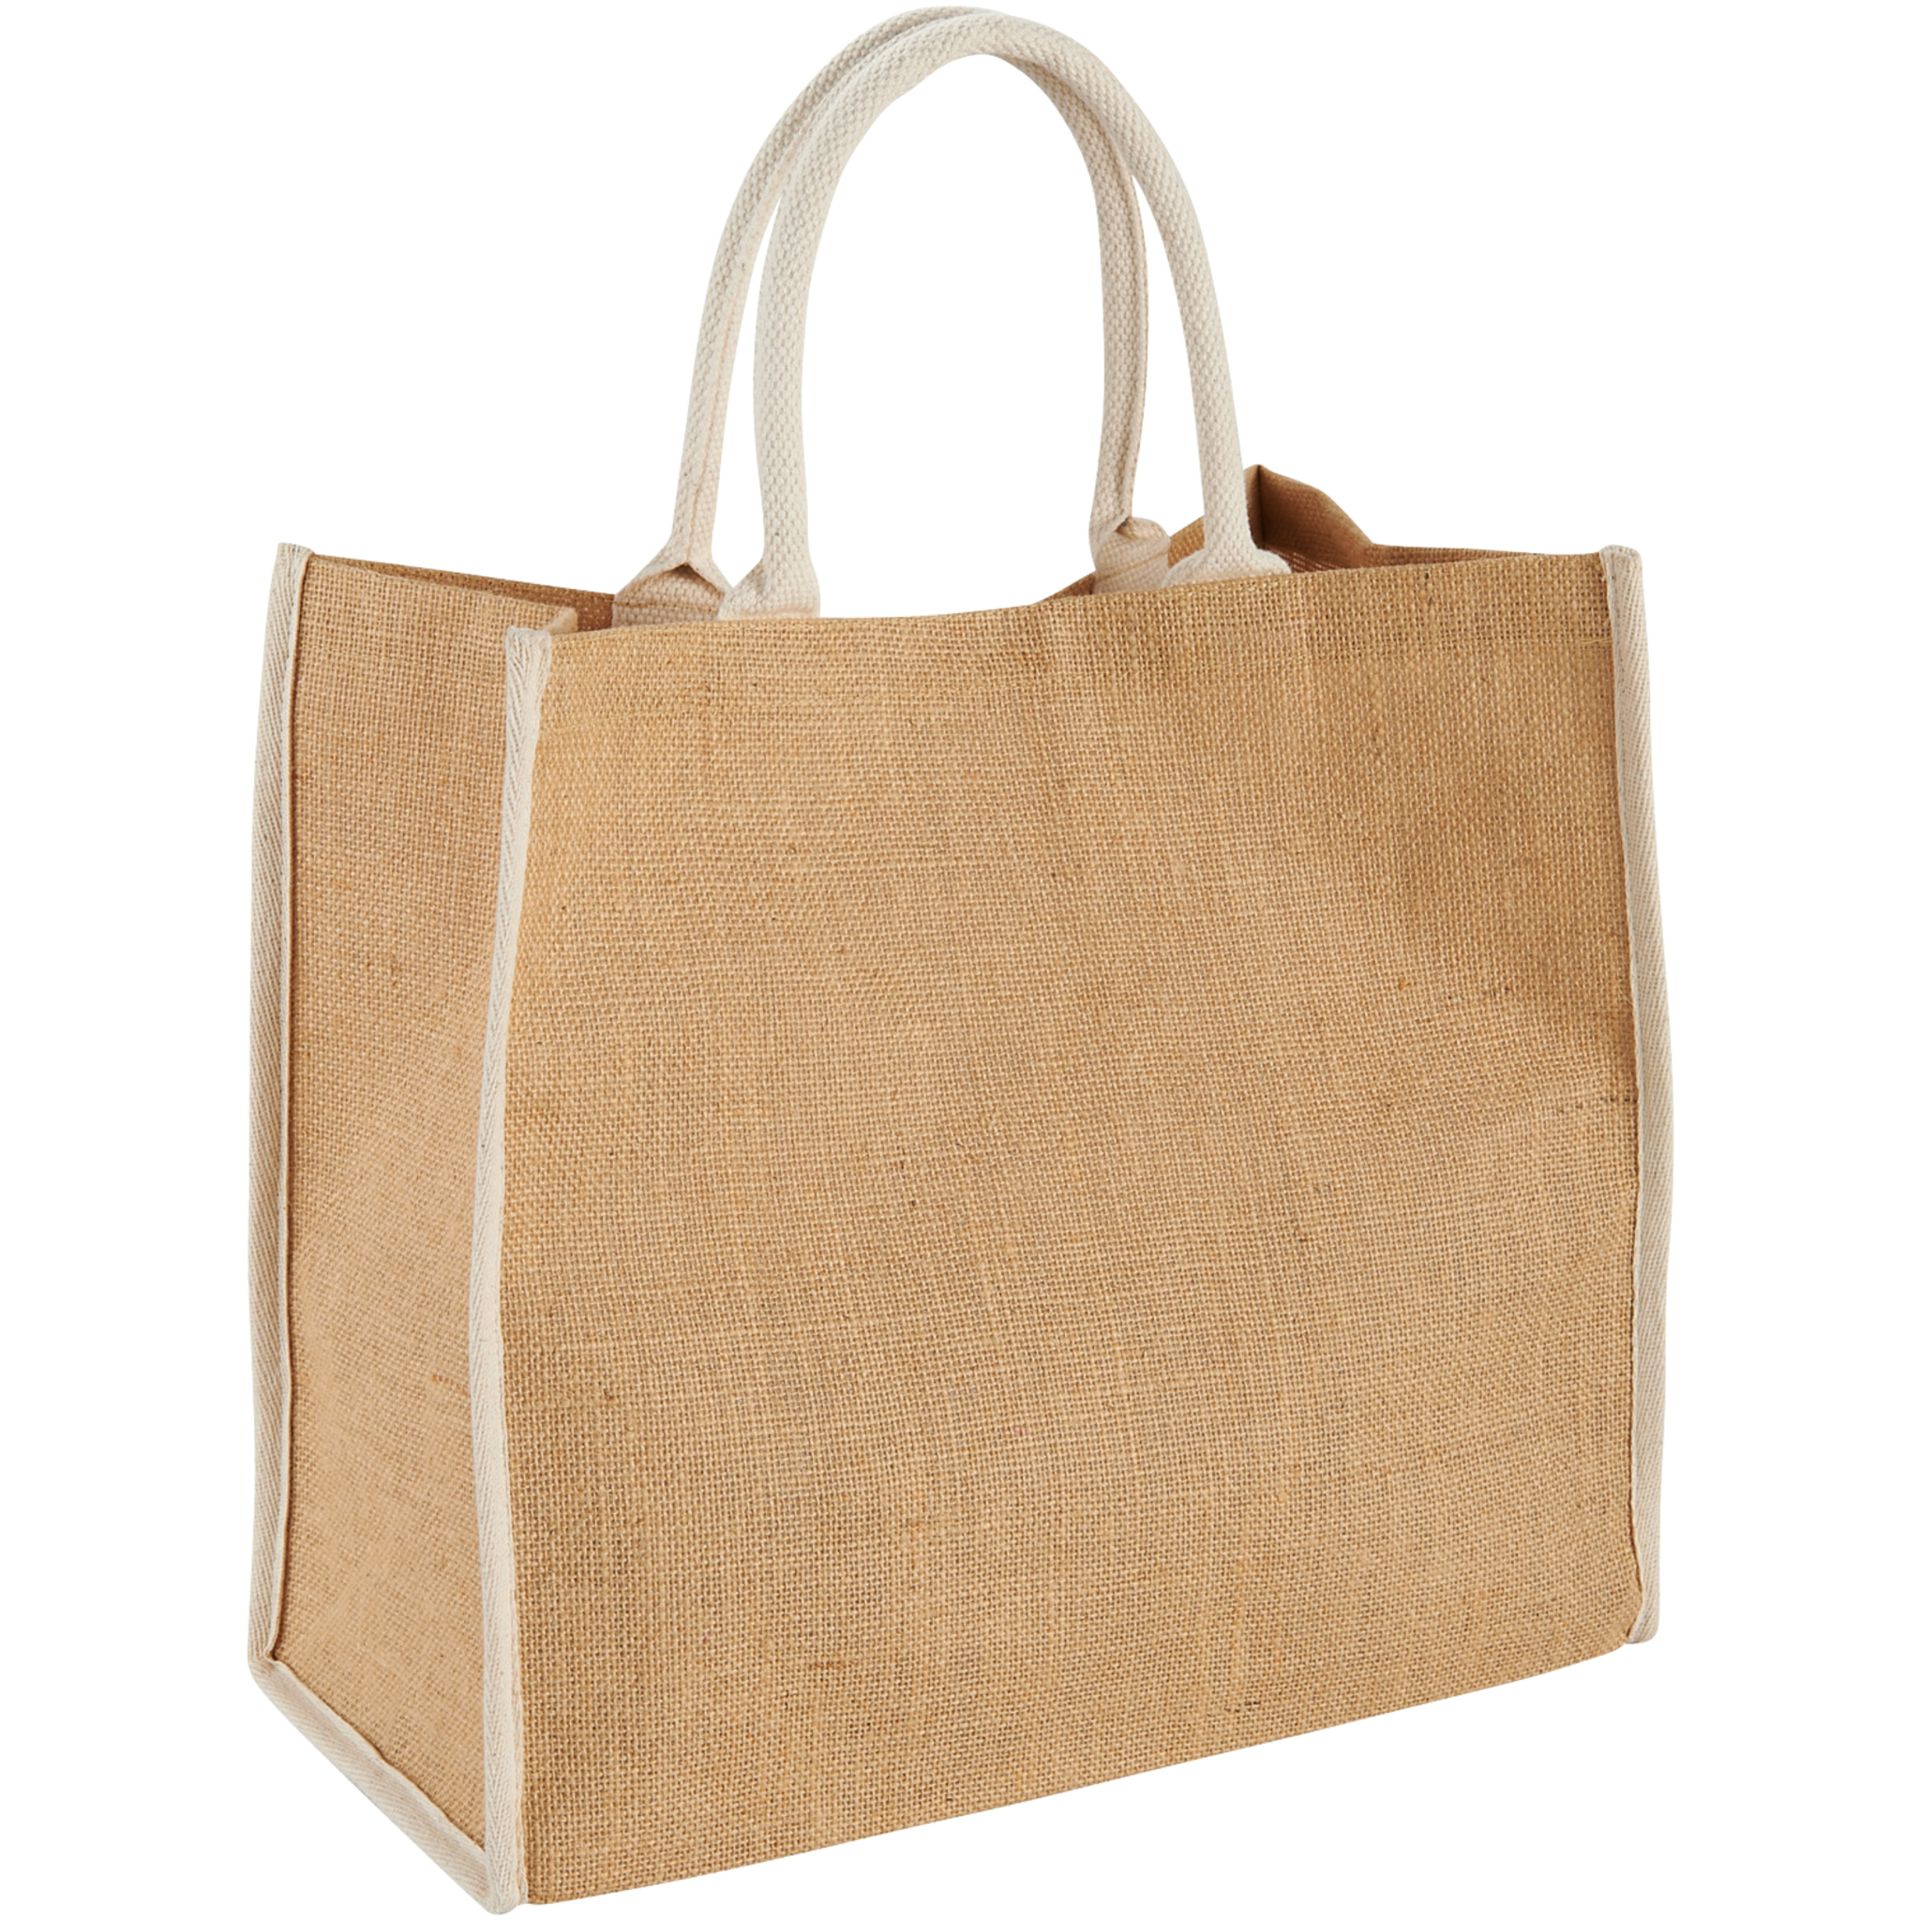 Jute shopper with white handles and matching edge trim